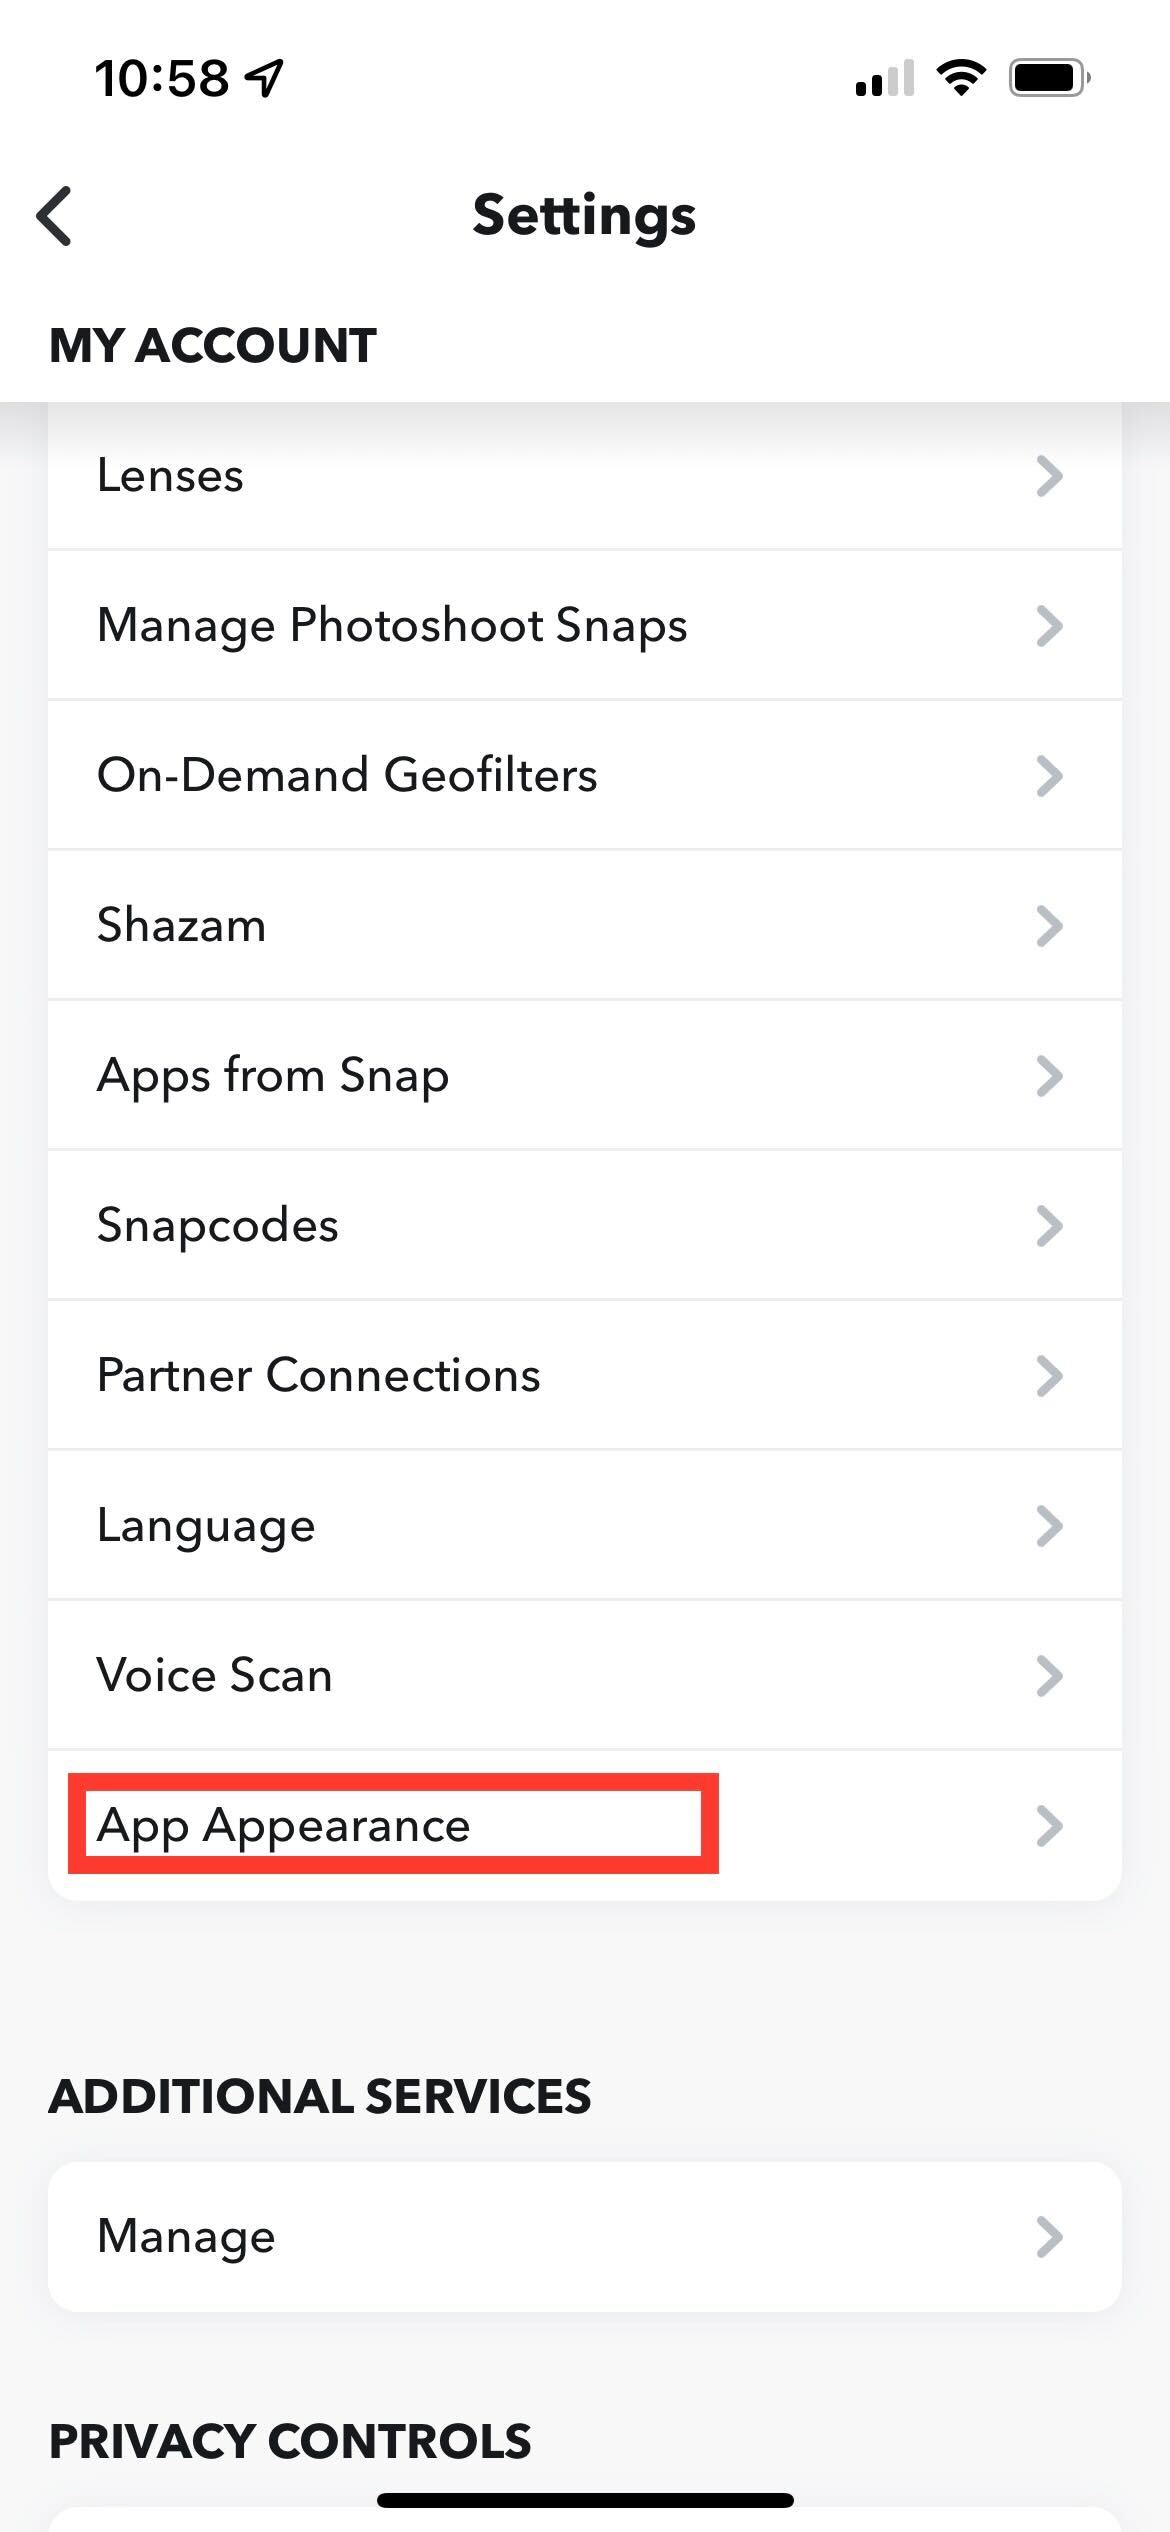 Click Application Appearance to continue